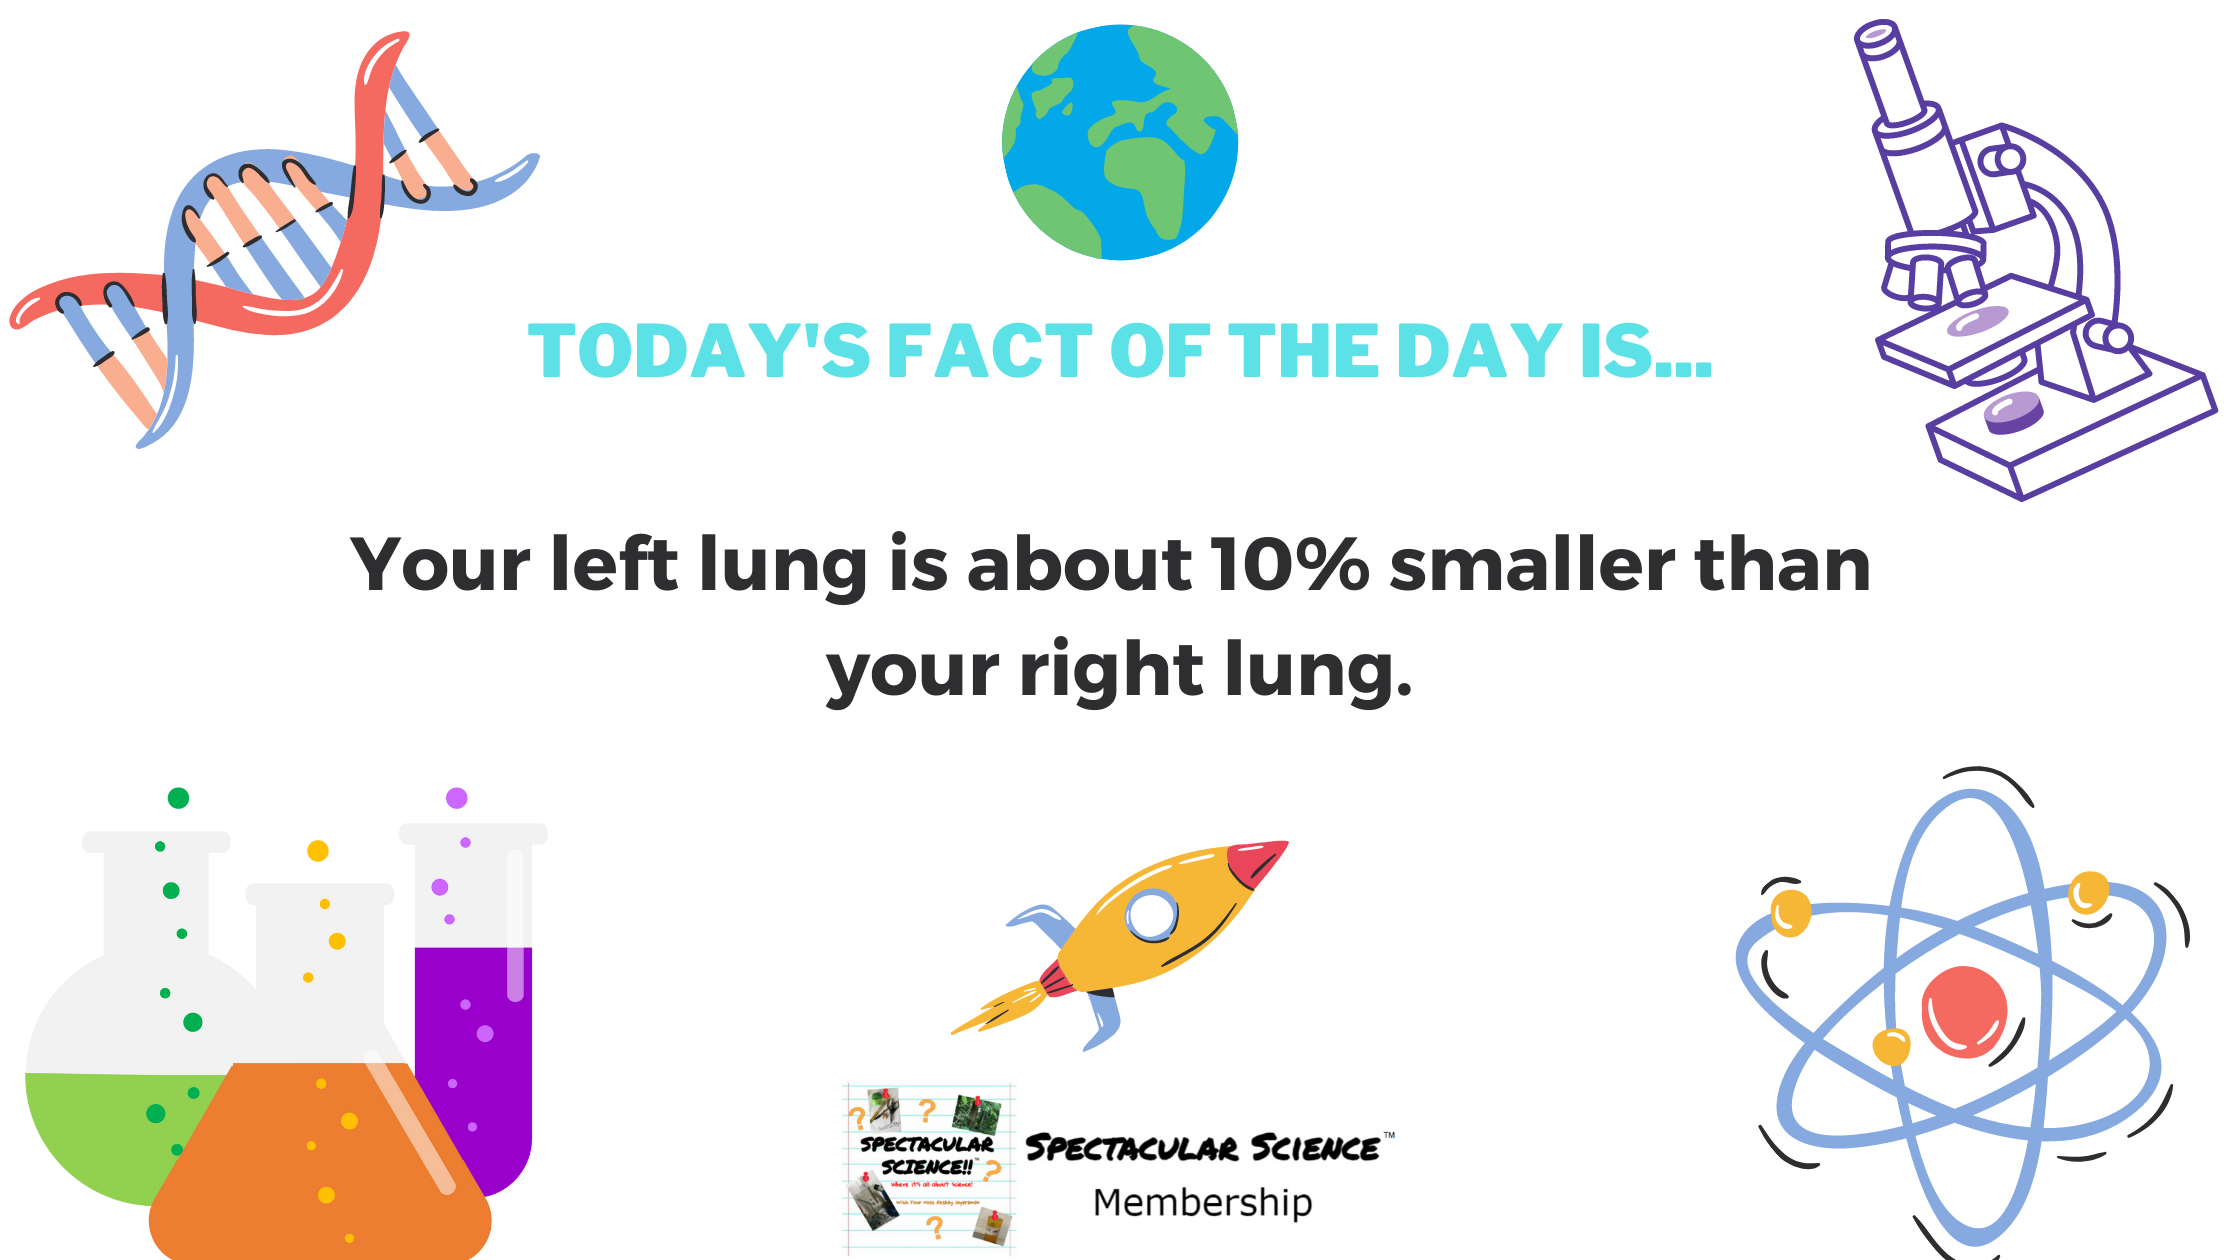 Fact of the Day Image Apr. 7th